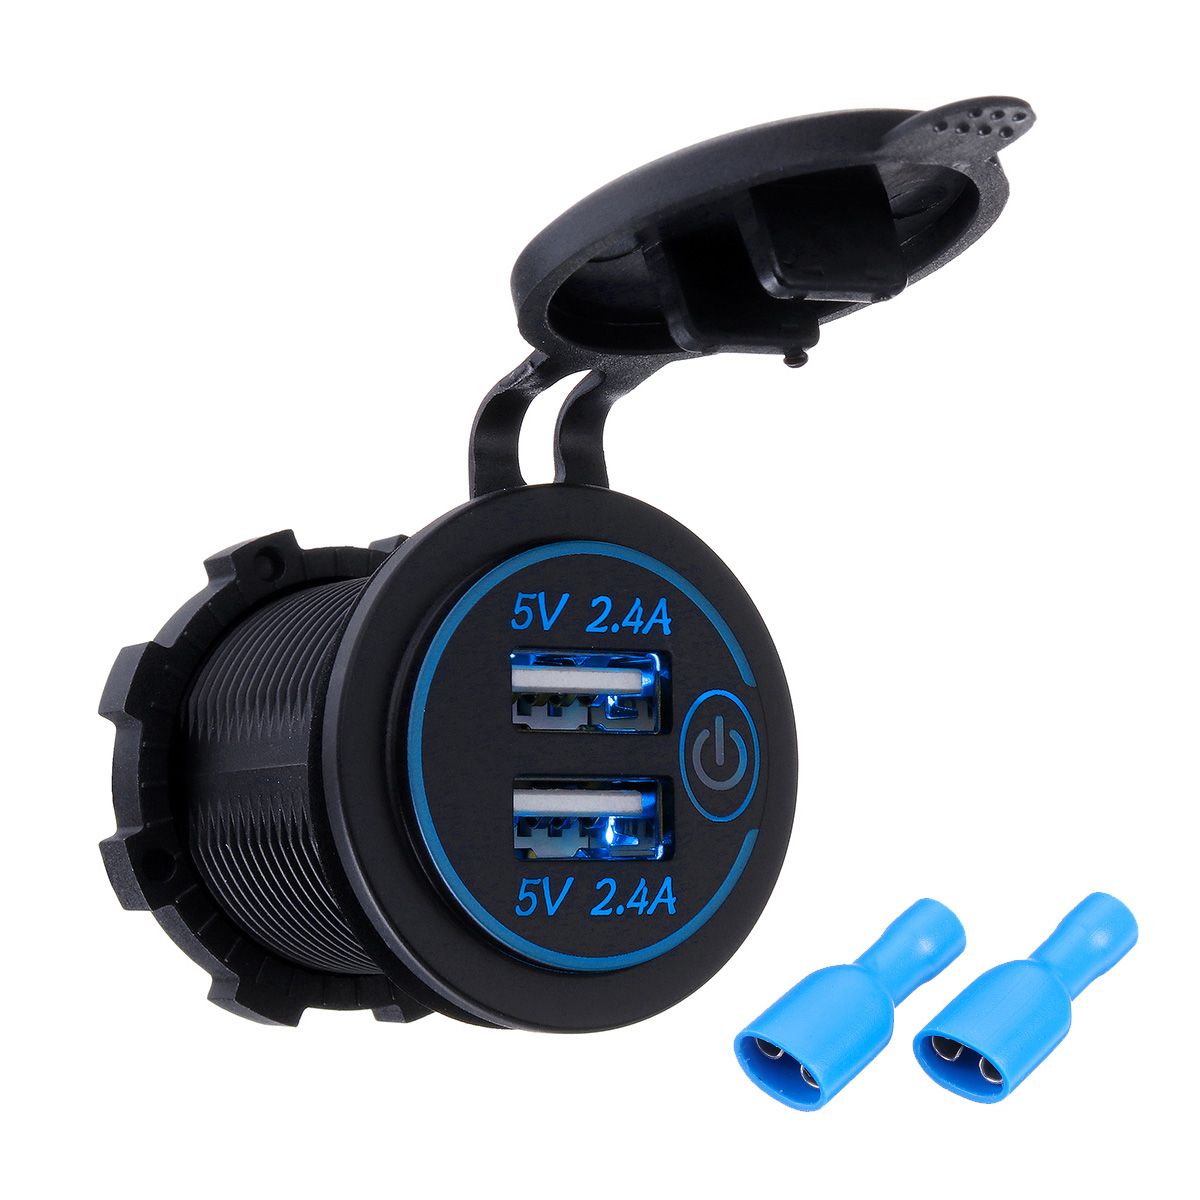 P18-S-Touch-Switch-with-Terminal-24A24A-Dual-USB-Car-Motorized-Modified-Charger-Mobile-Phone-12-24V-1534307